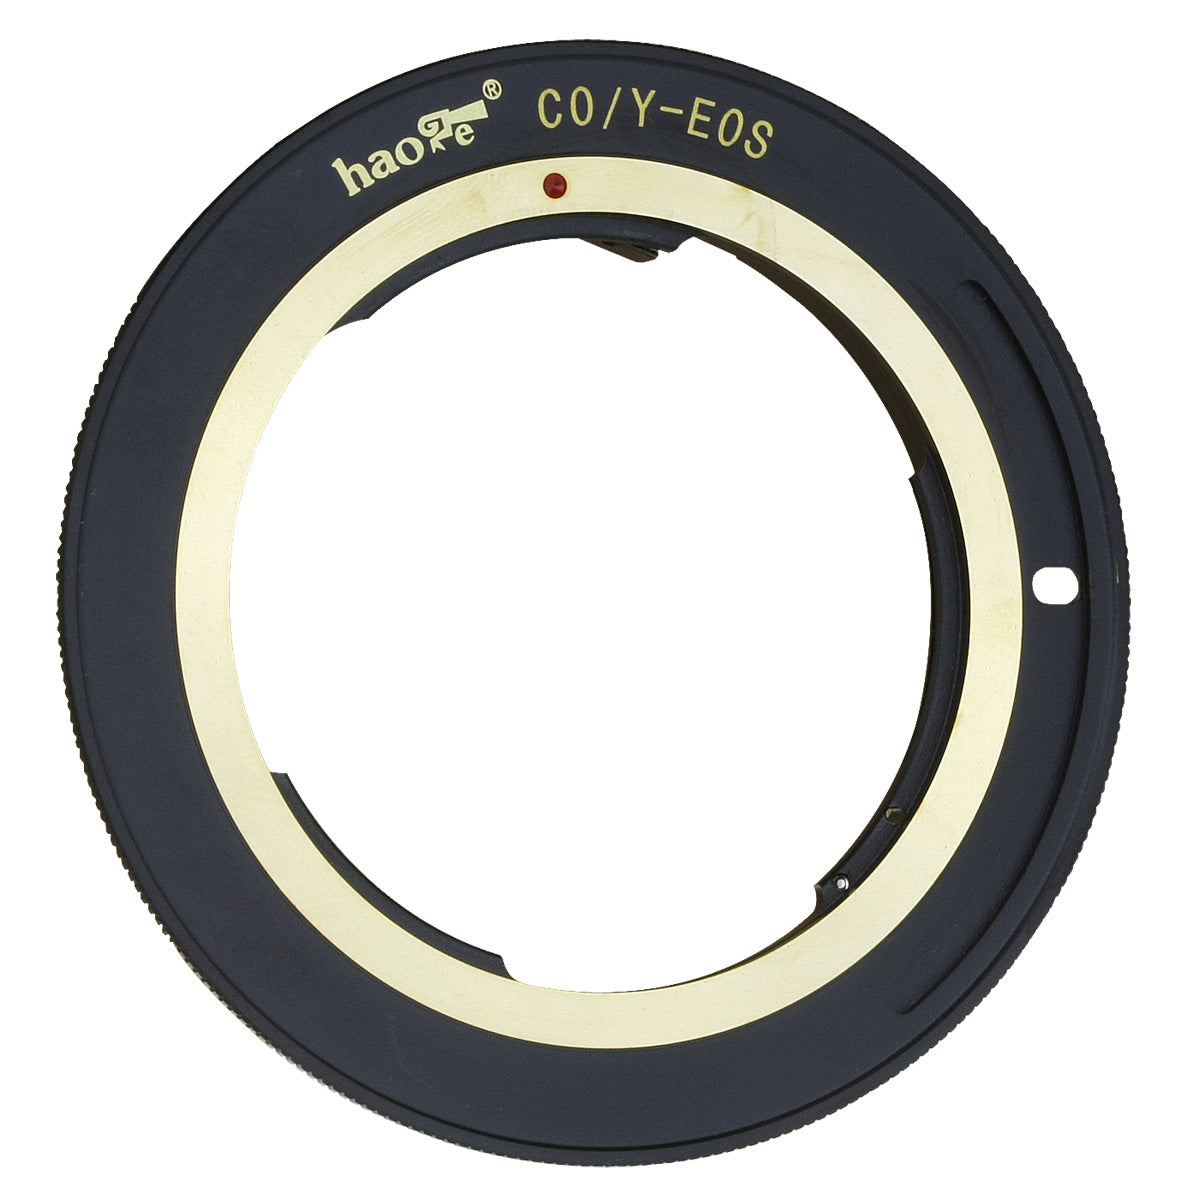 Haoge Lens Mount Adapter for Contax / Yashica C/Y CY mount Lens to Canon EOS EF EF-S Mount Camera